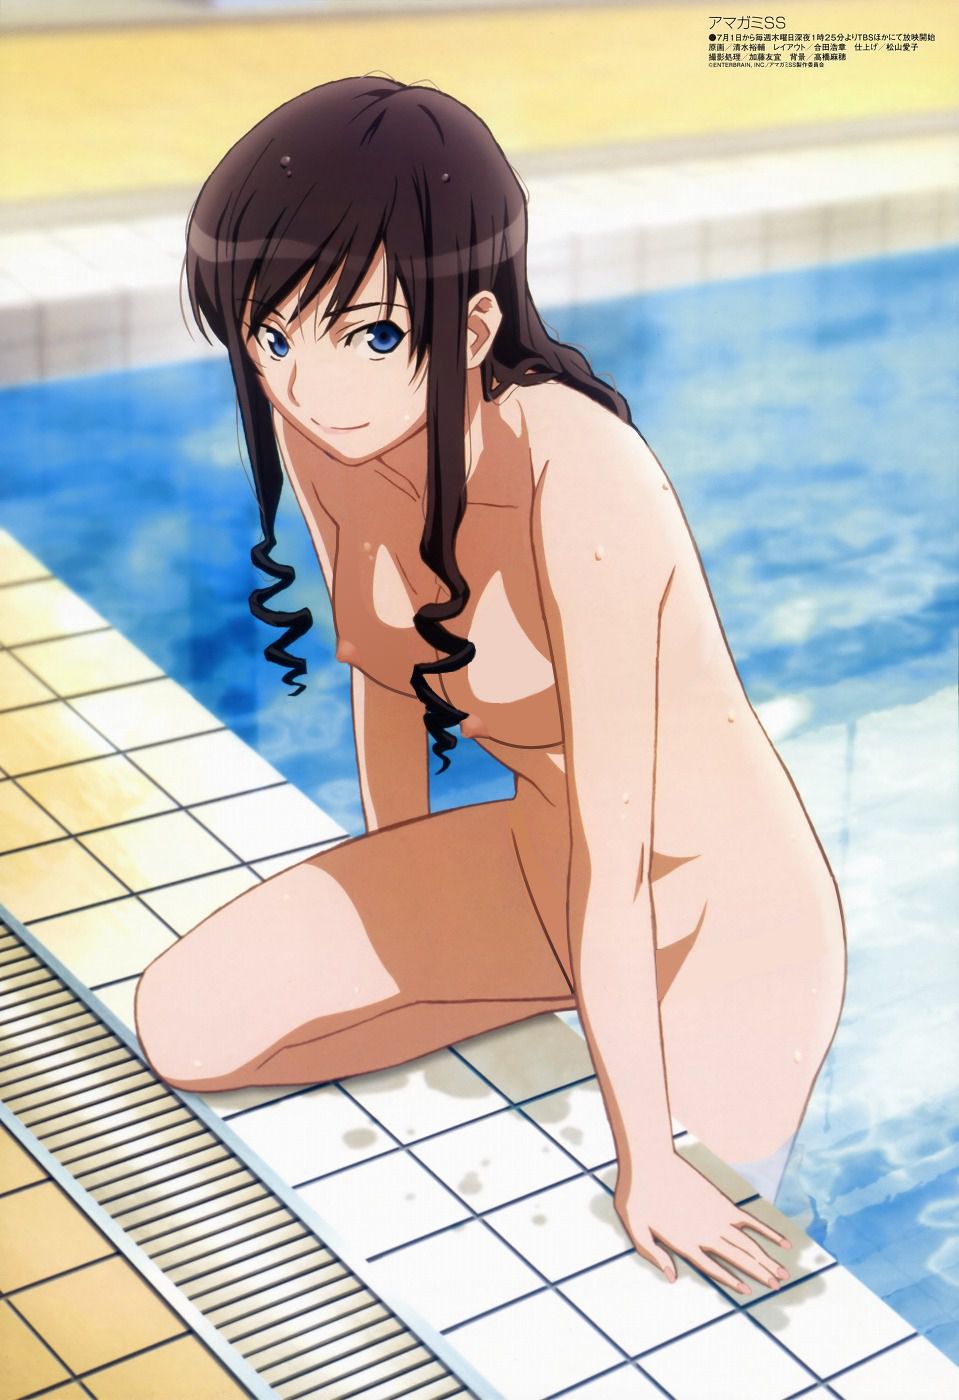 Stripping anime pictures Photoshop image part 5 50 sheets 32